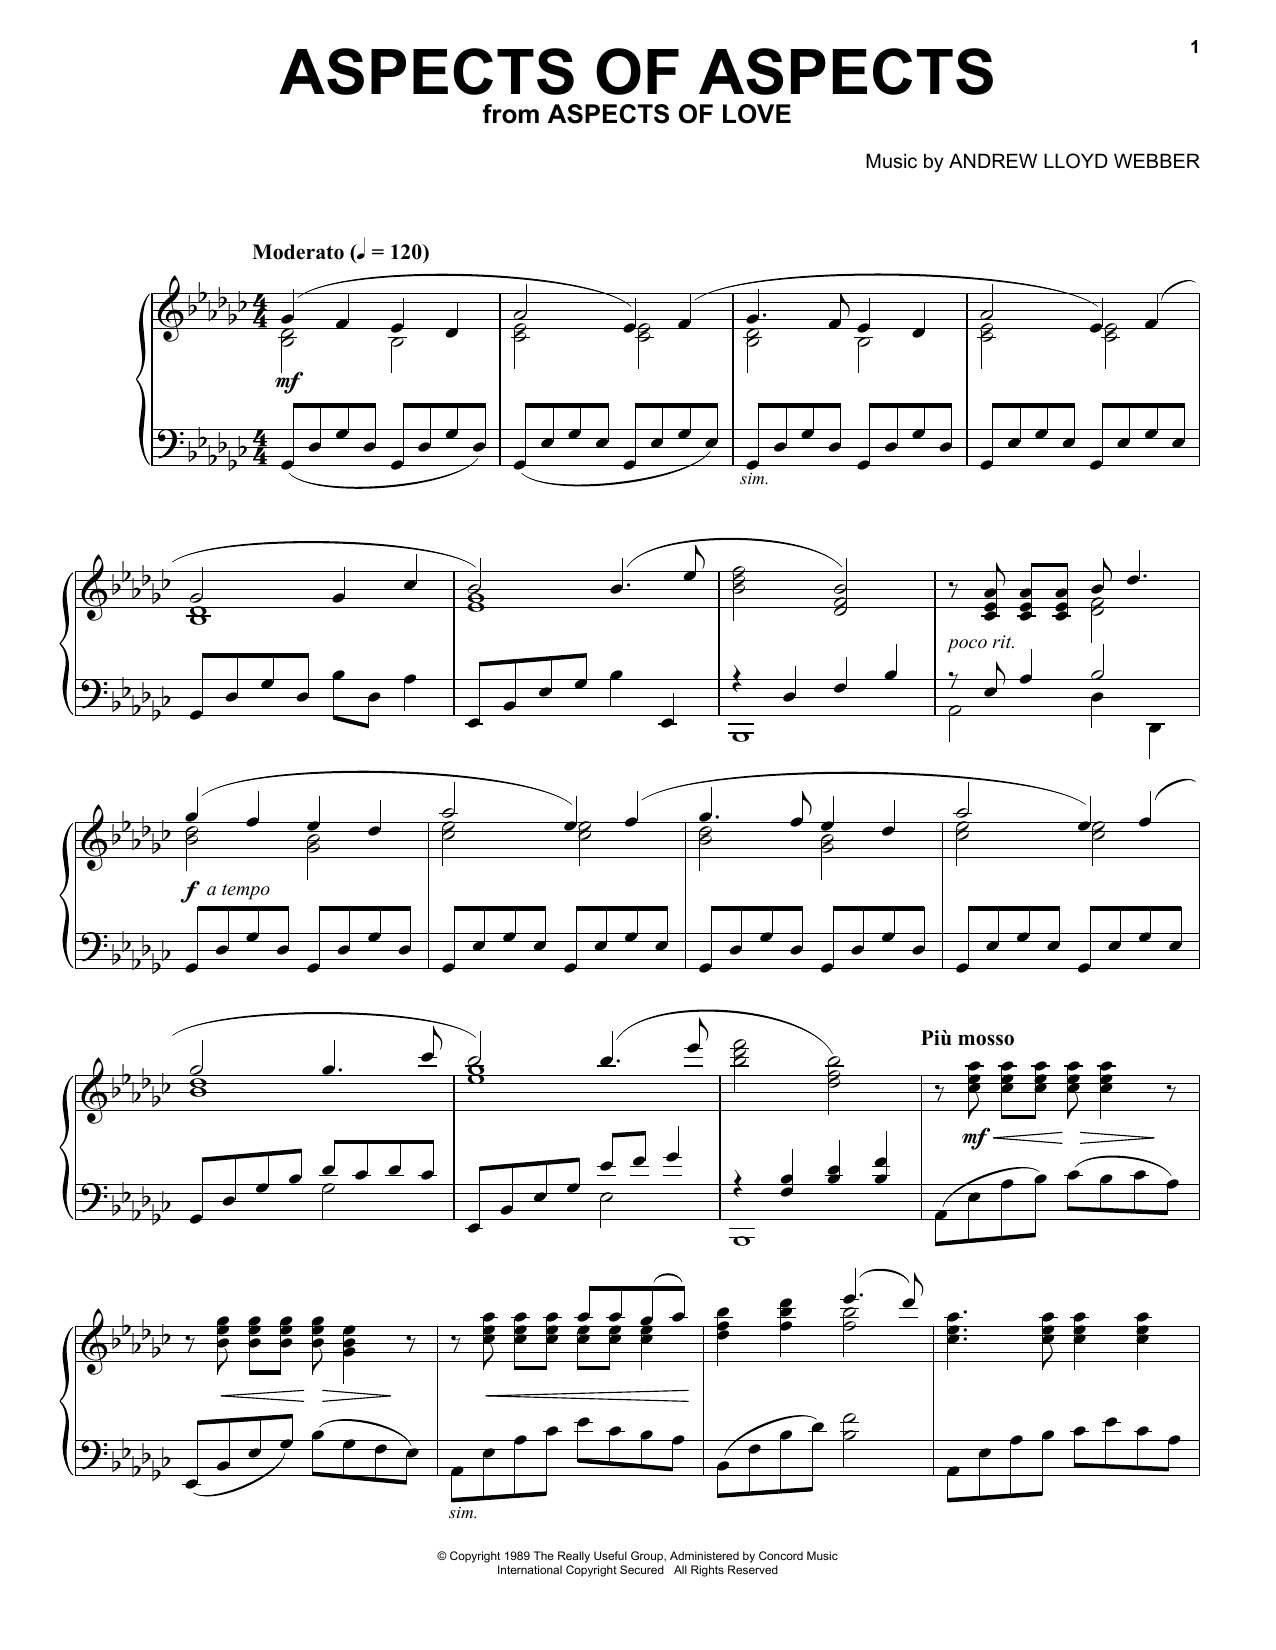 Download Andrew Lloyd Webber Aspects Of Aspects Sheet Music